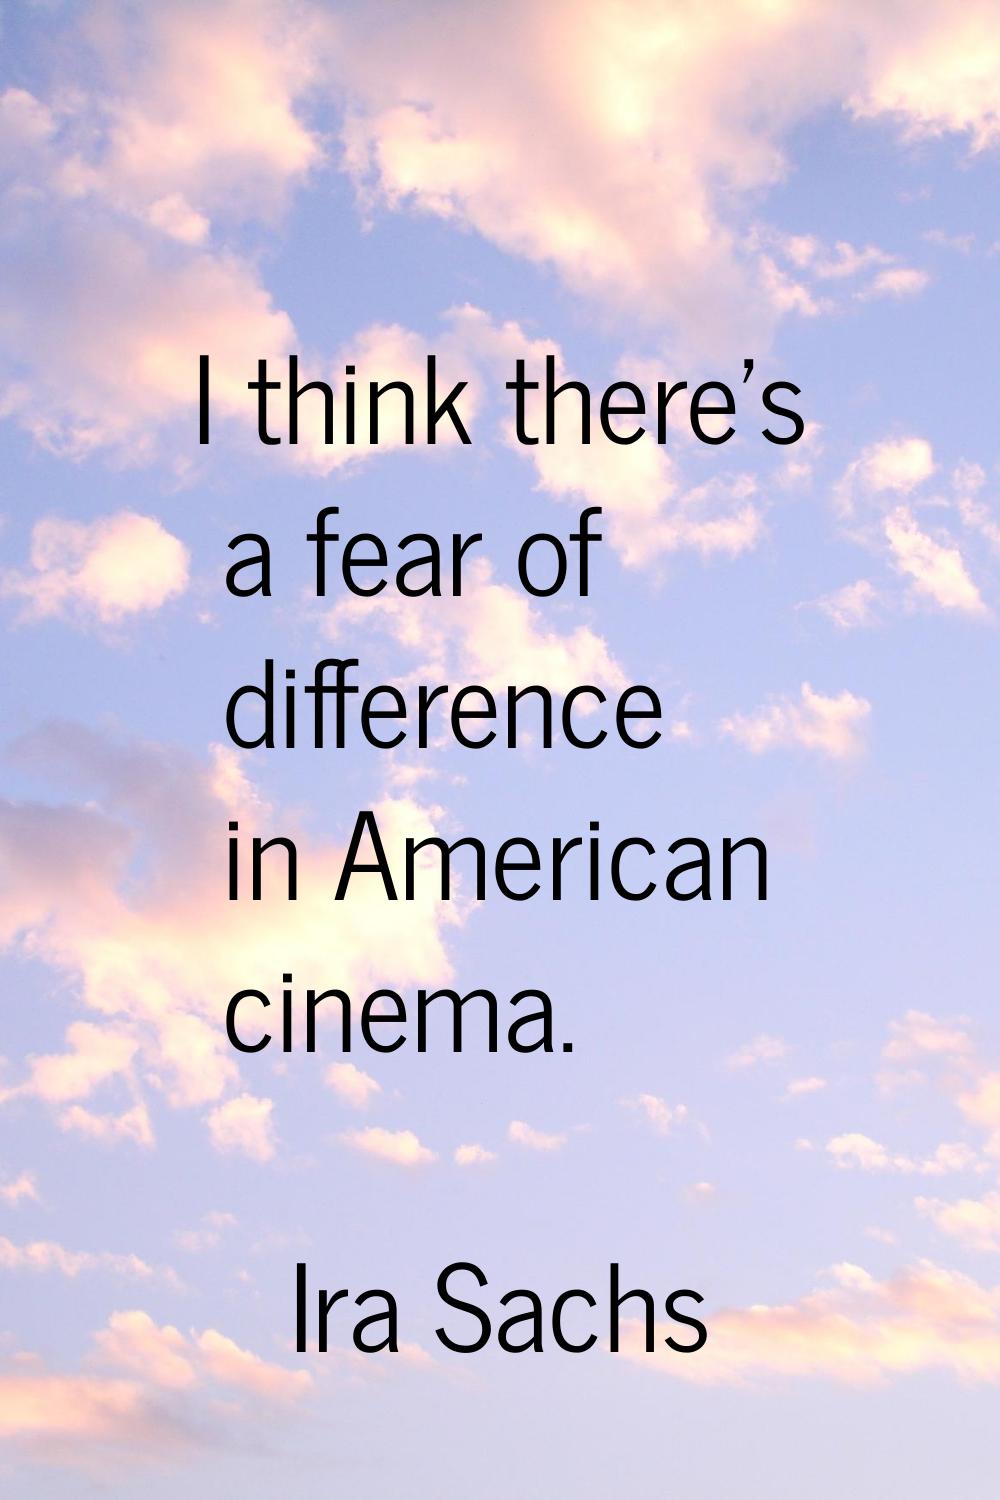 I think there's a fear of difference in American cinema.